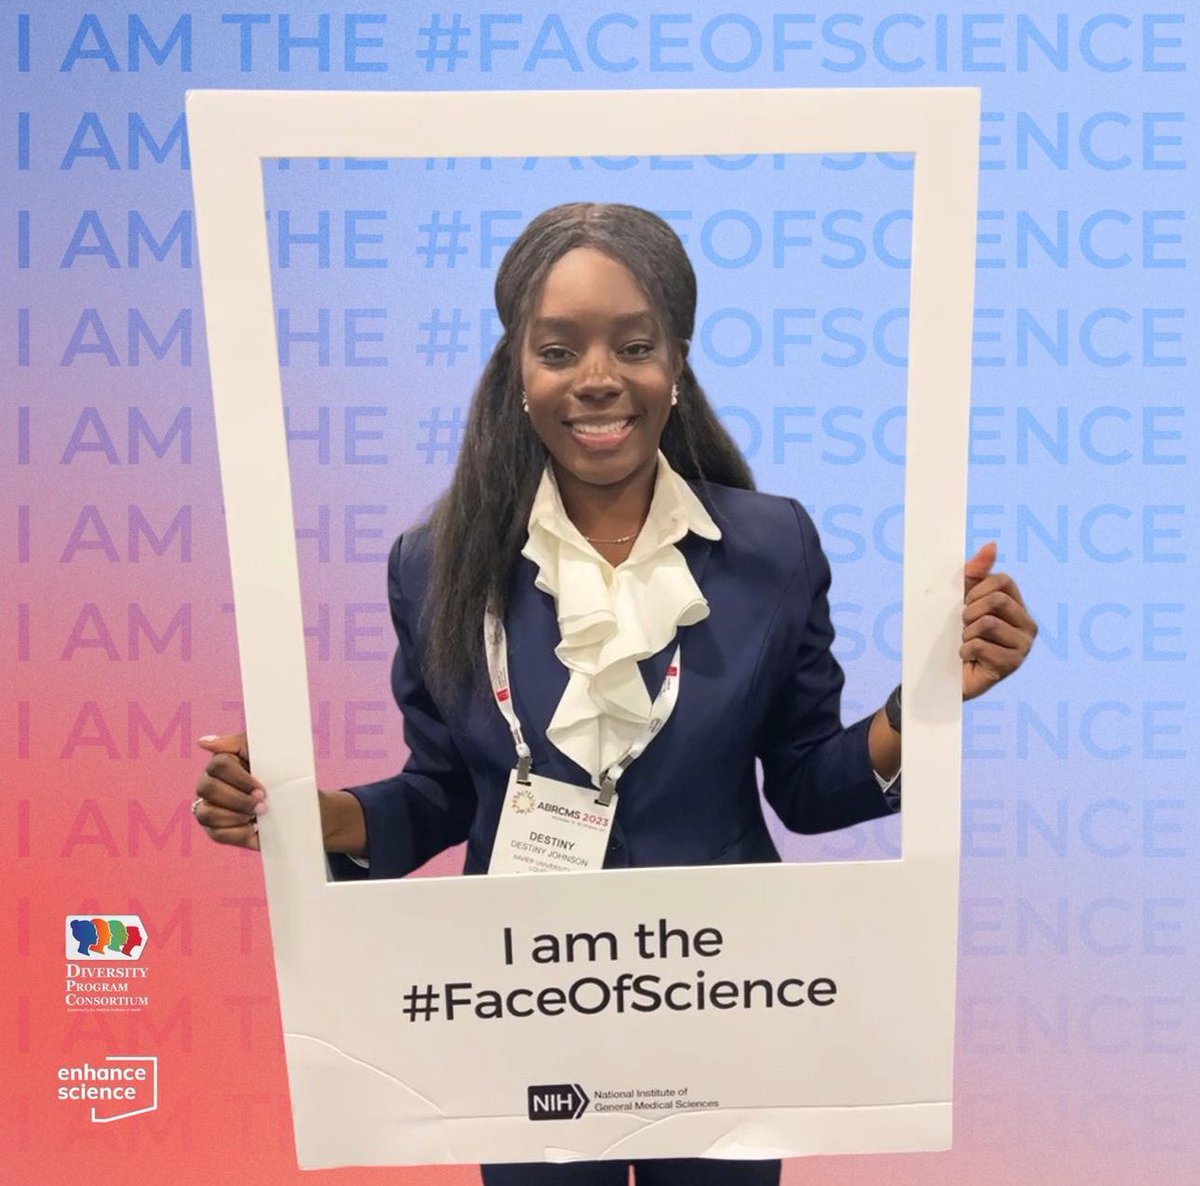 'I love being a scientist because it provides me with the opportunity to quench my curiosity of the world and understand how different processes work together.' - Destiny, @xulabuild scholar! Share your own #FaceOfScience selfie on tomorrow, April 24th!